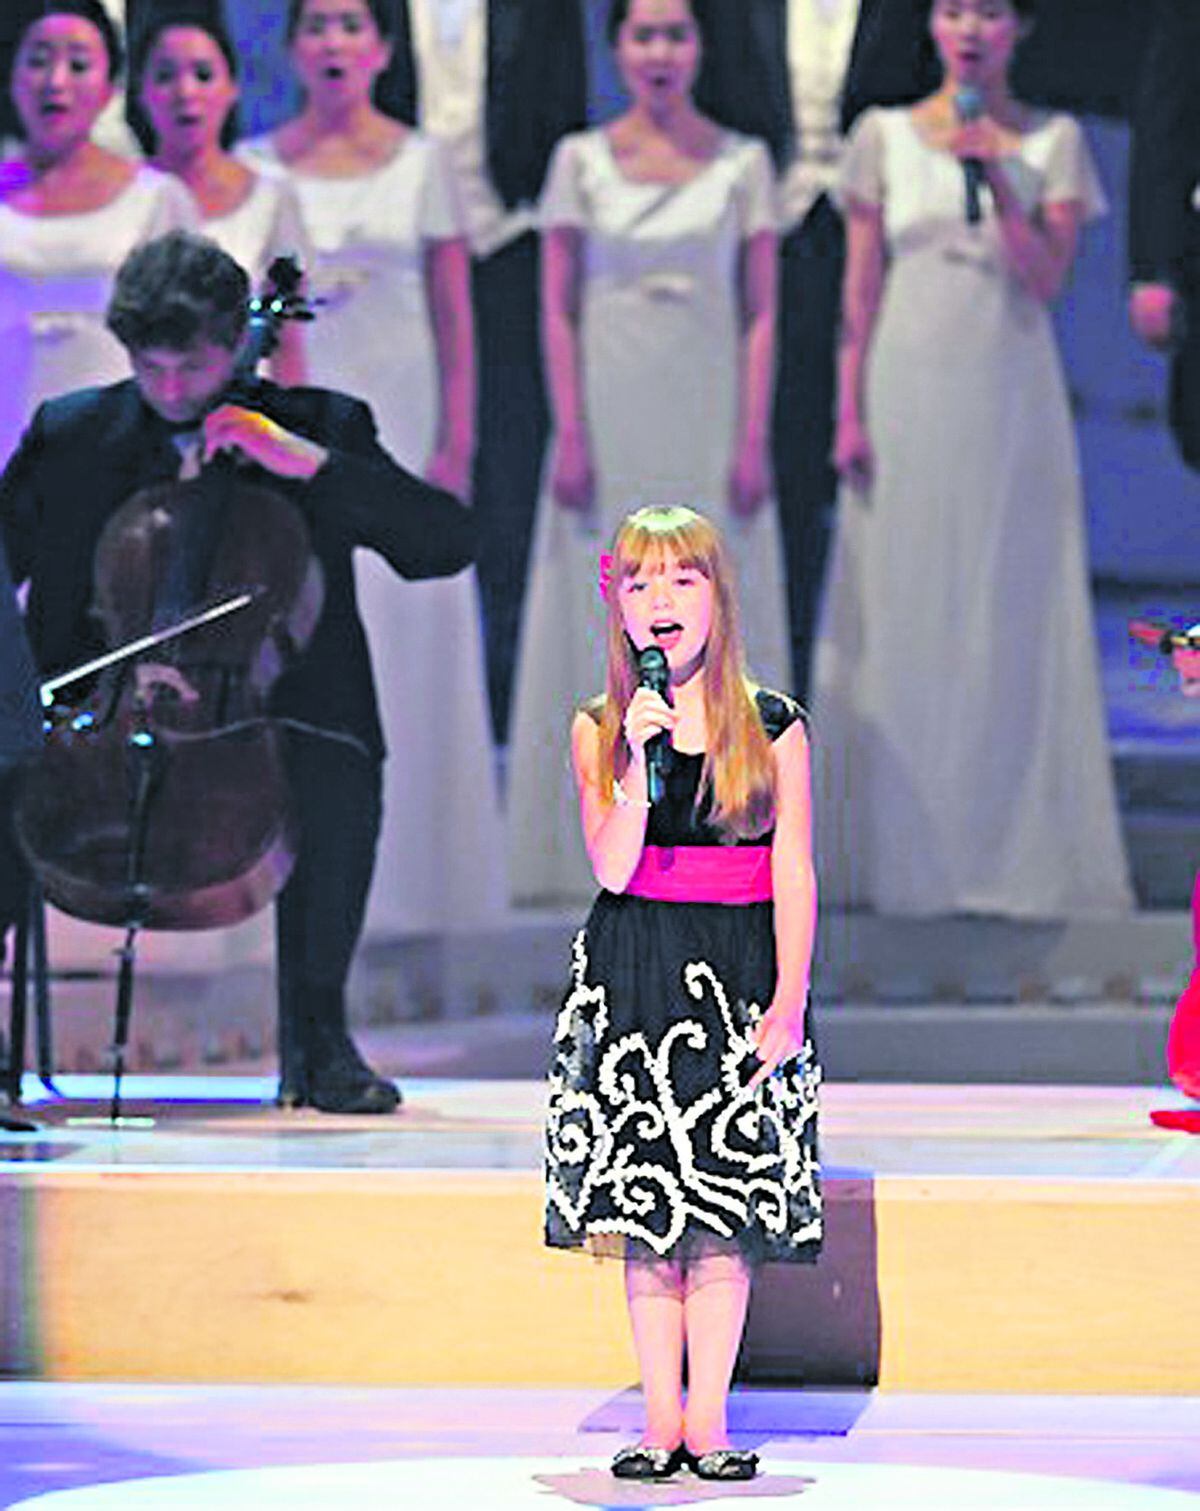 Connie Talbot, 9, at the Road To Hope concert in South Korea